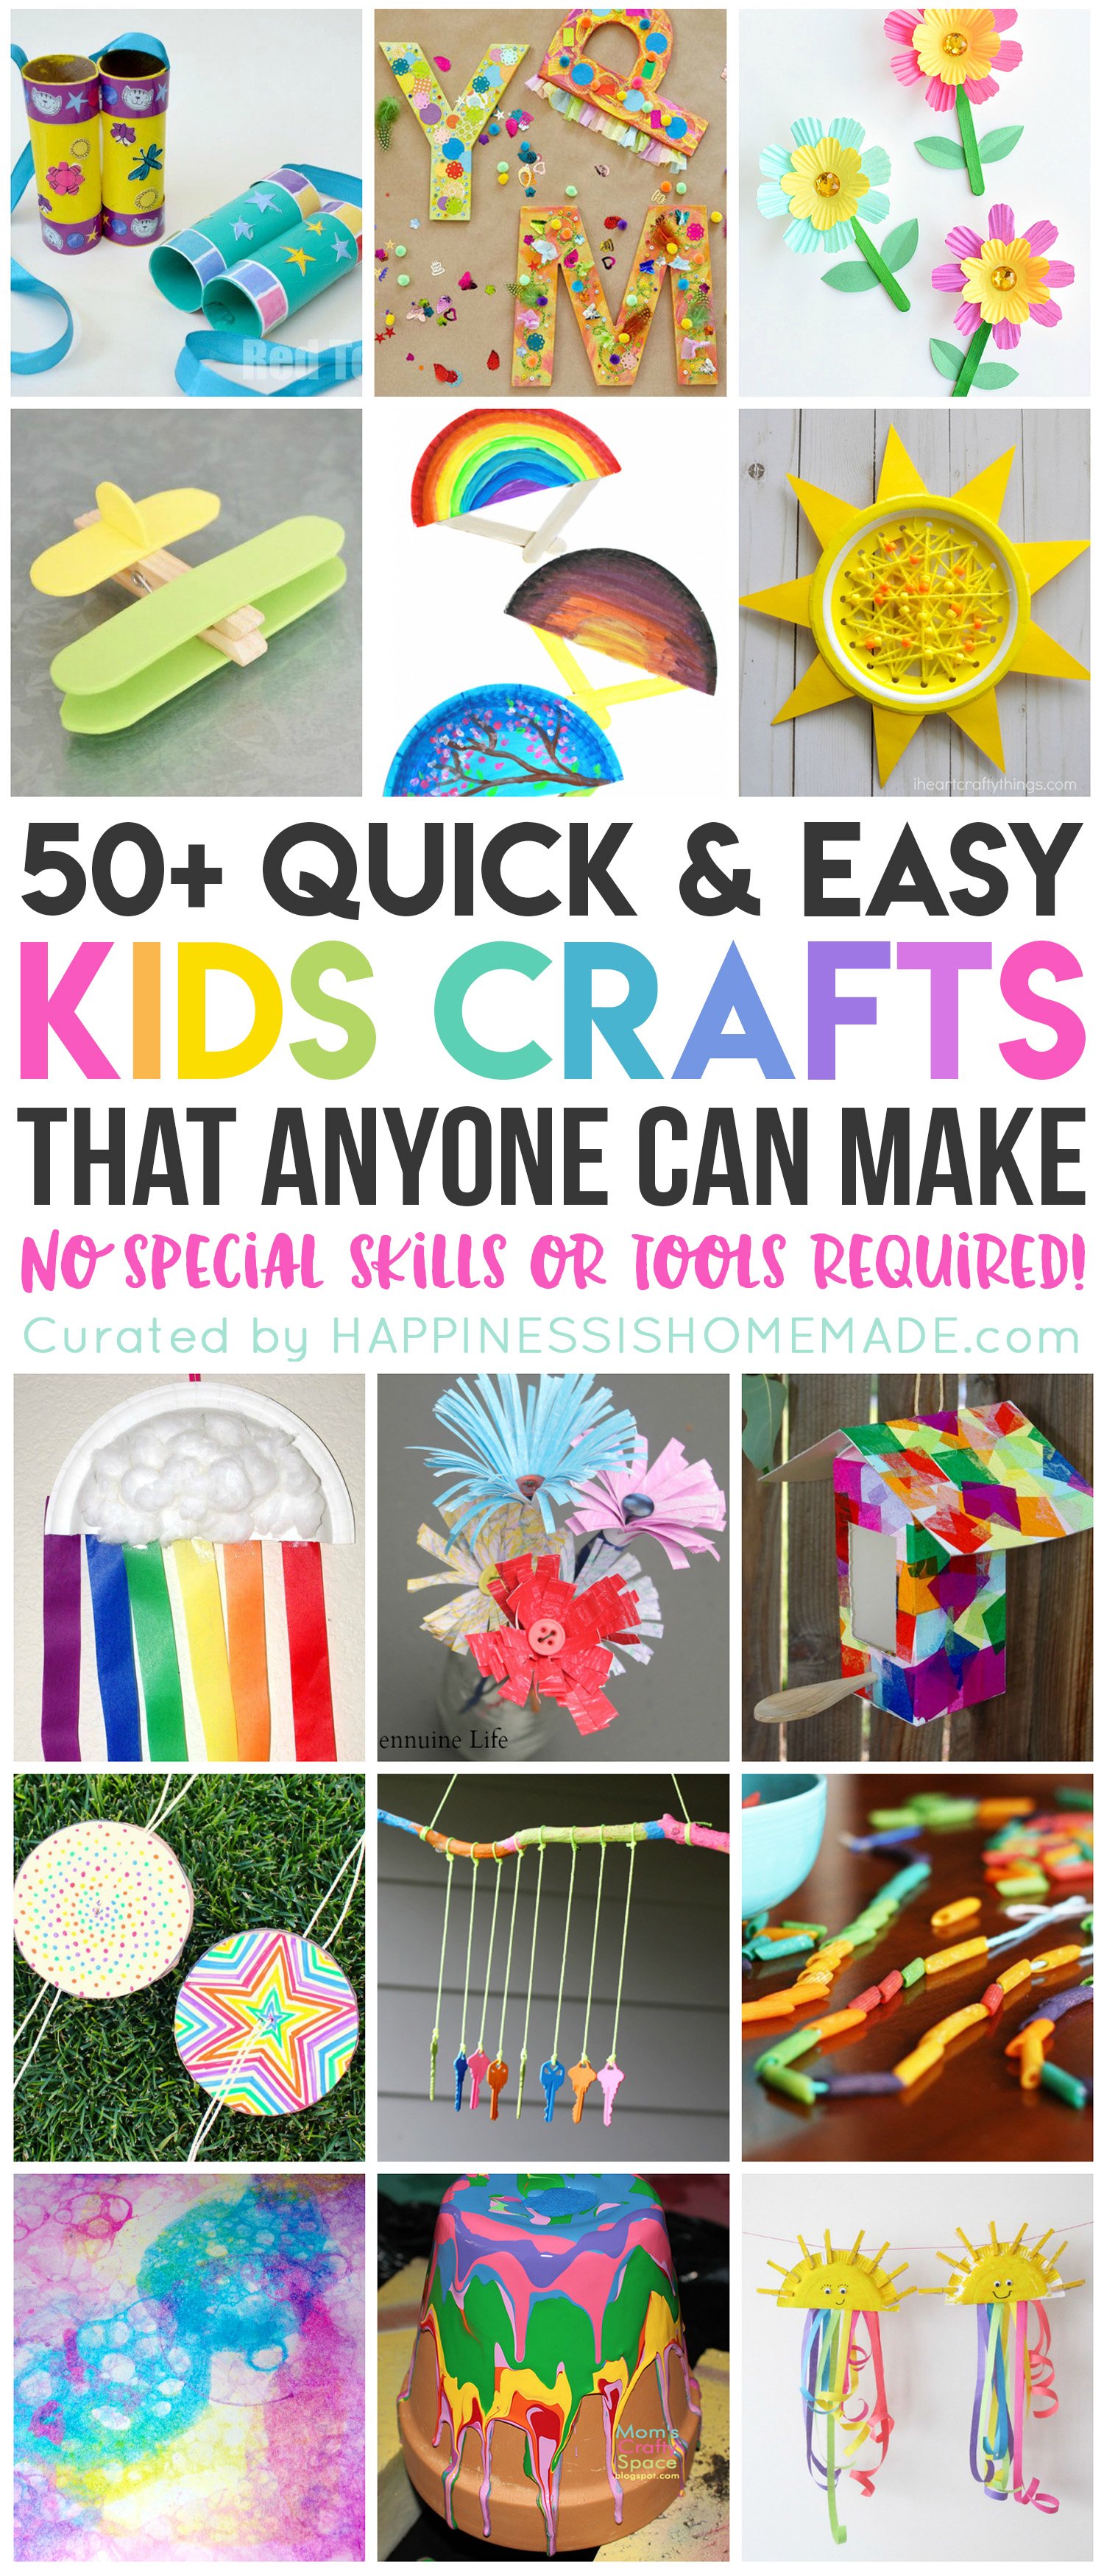 These 50+ quick and easy kids crafts can be made in under 30 minutes using items that you probably already have around the house! No special tools or skills are required, so ANYONE can make these cute crafts for kids! Great fun for the entire family!